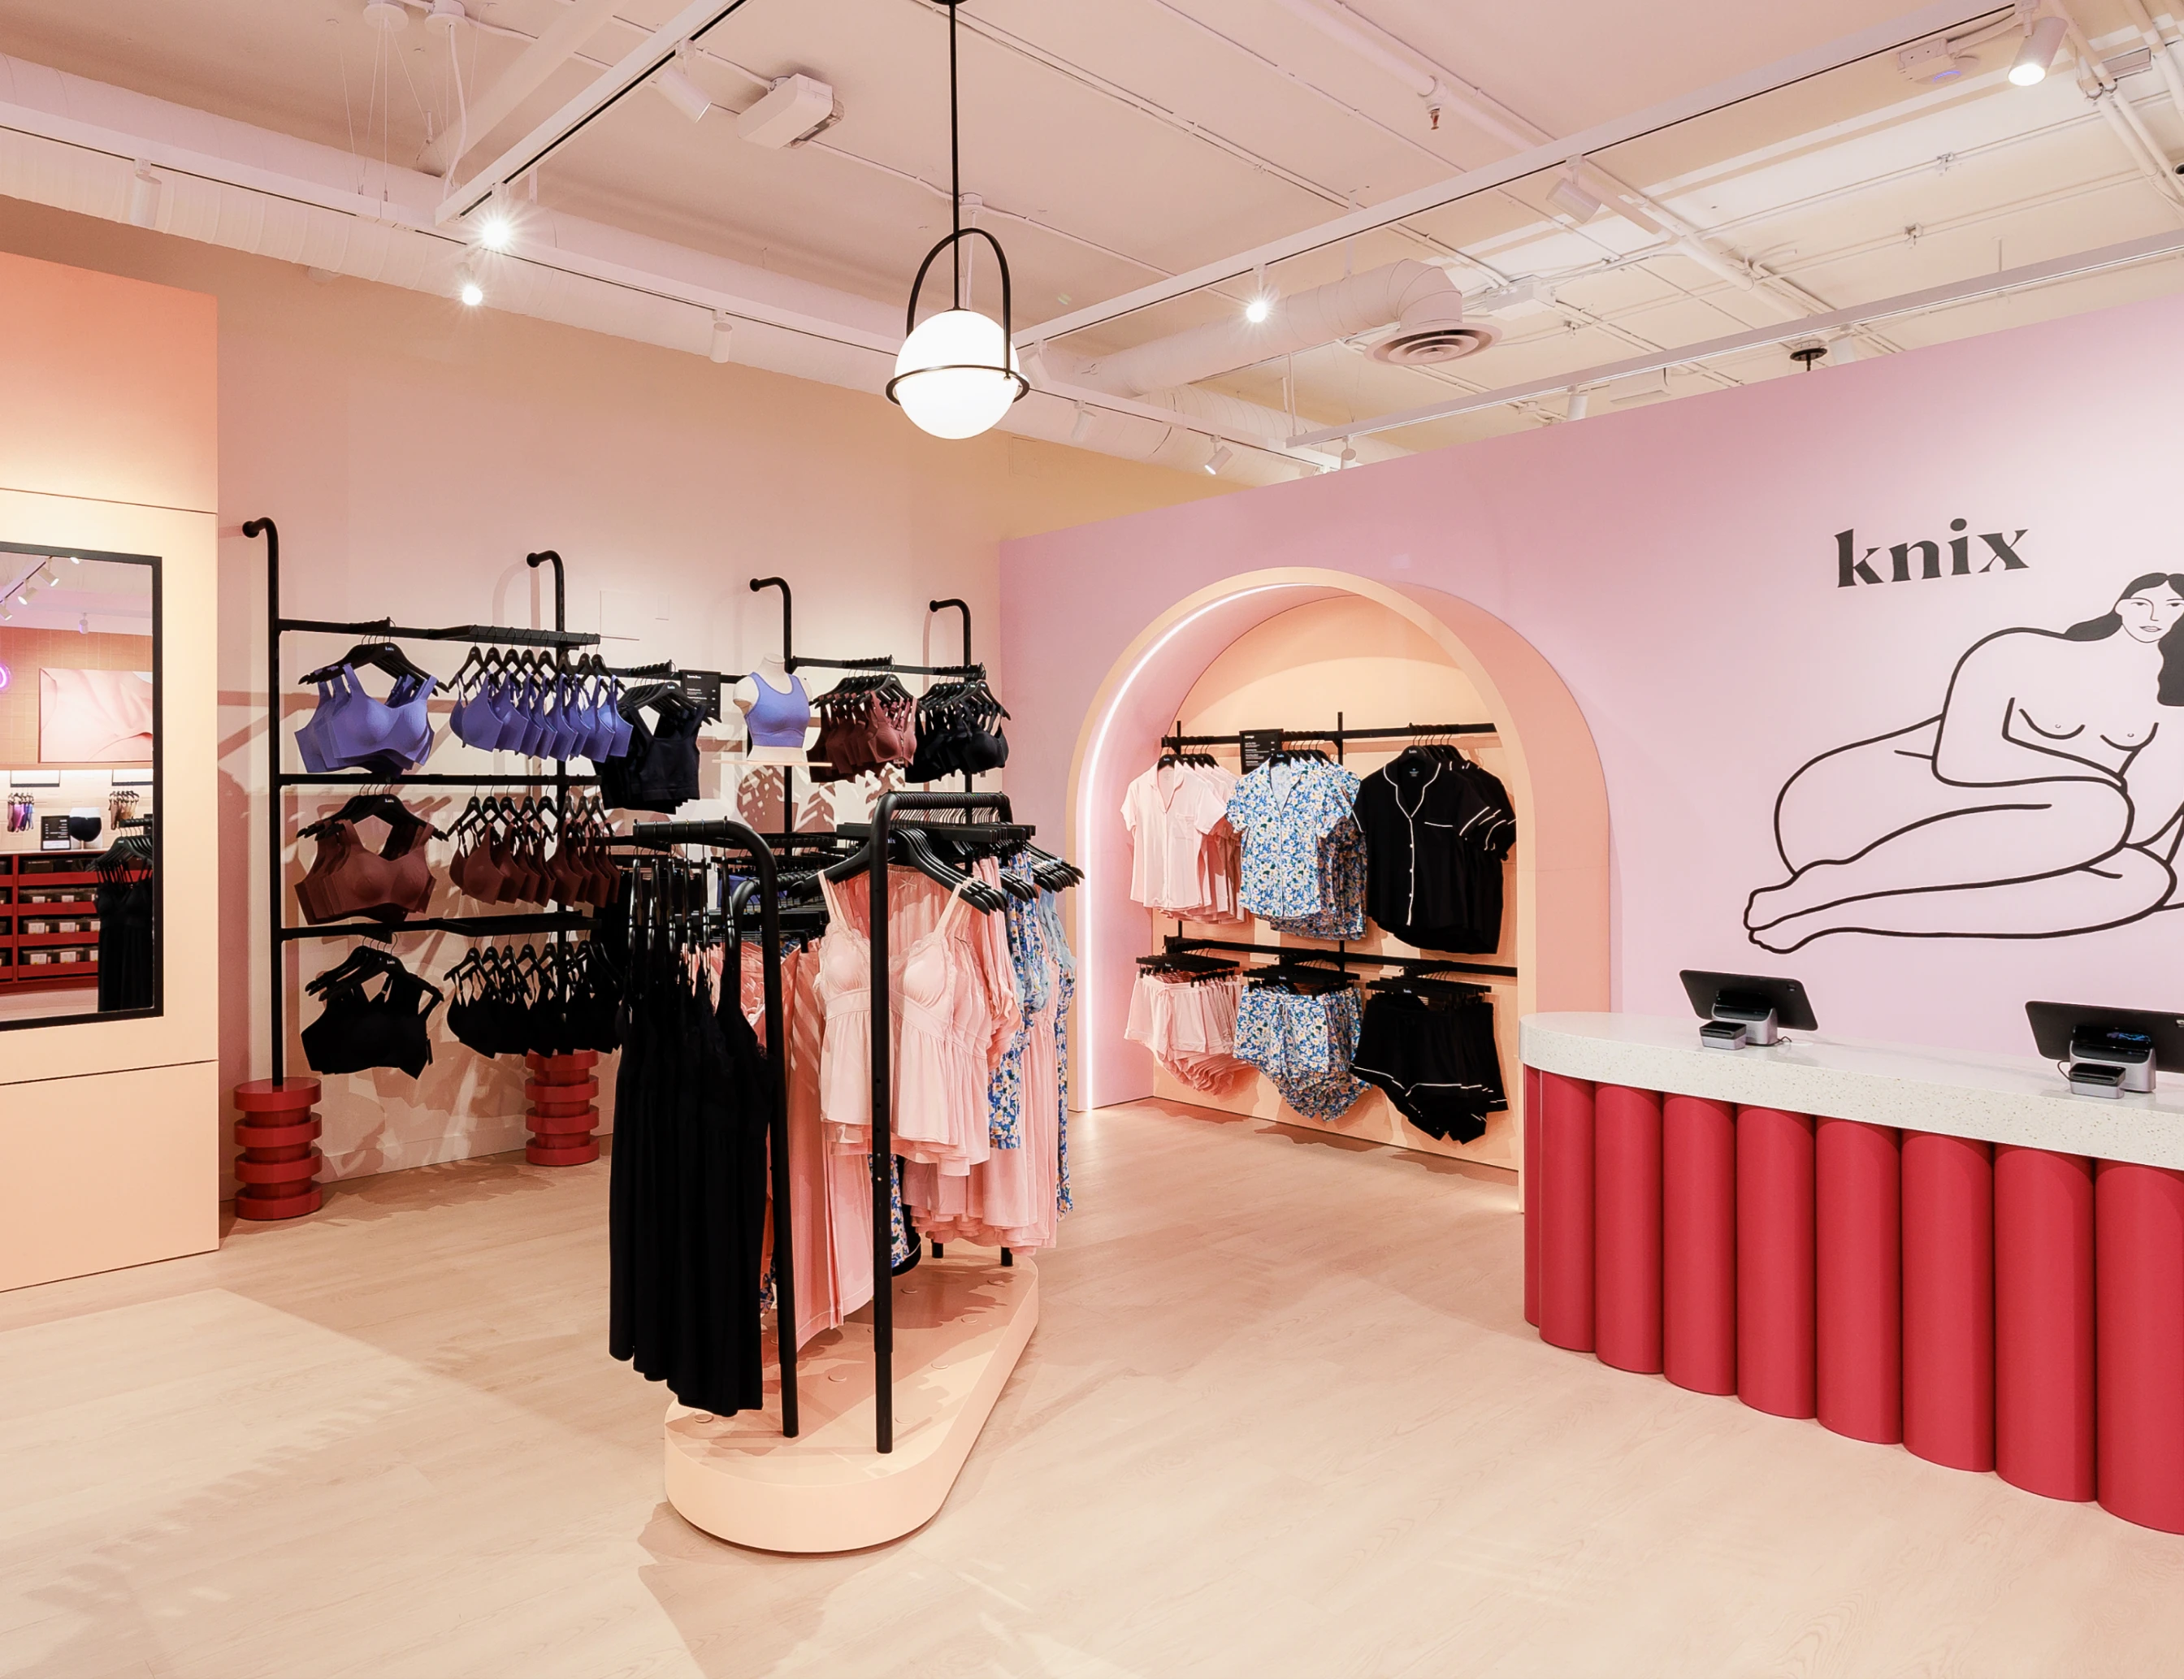 The Knix Bra Swap & Fit Event - British Columbia, 2646 W 4th Ave